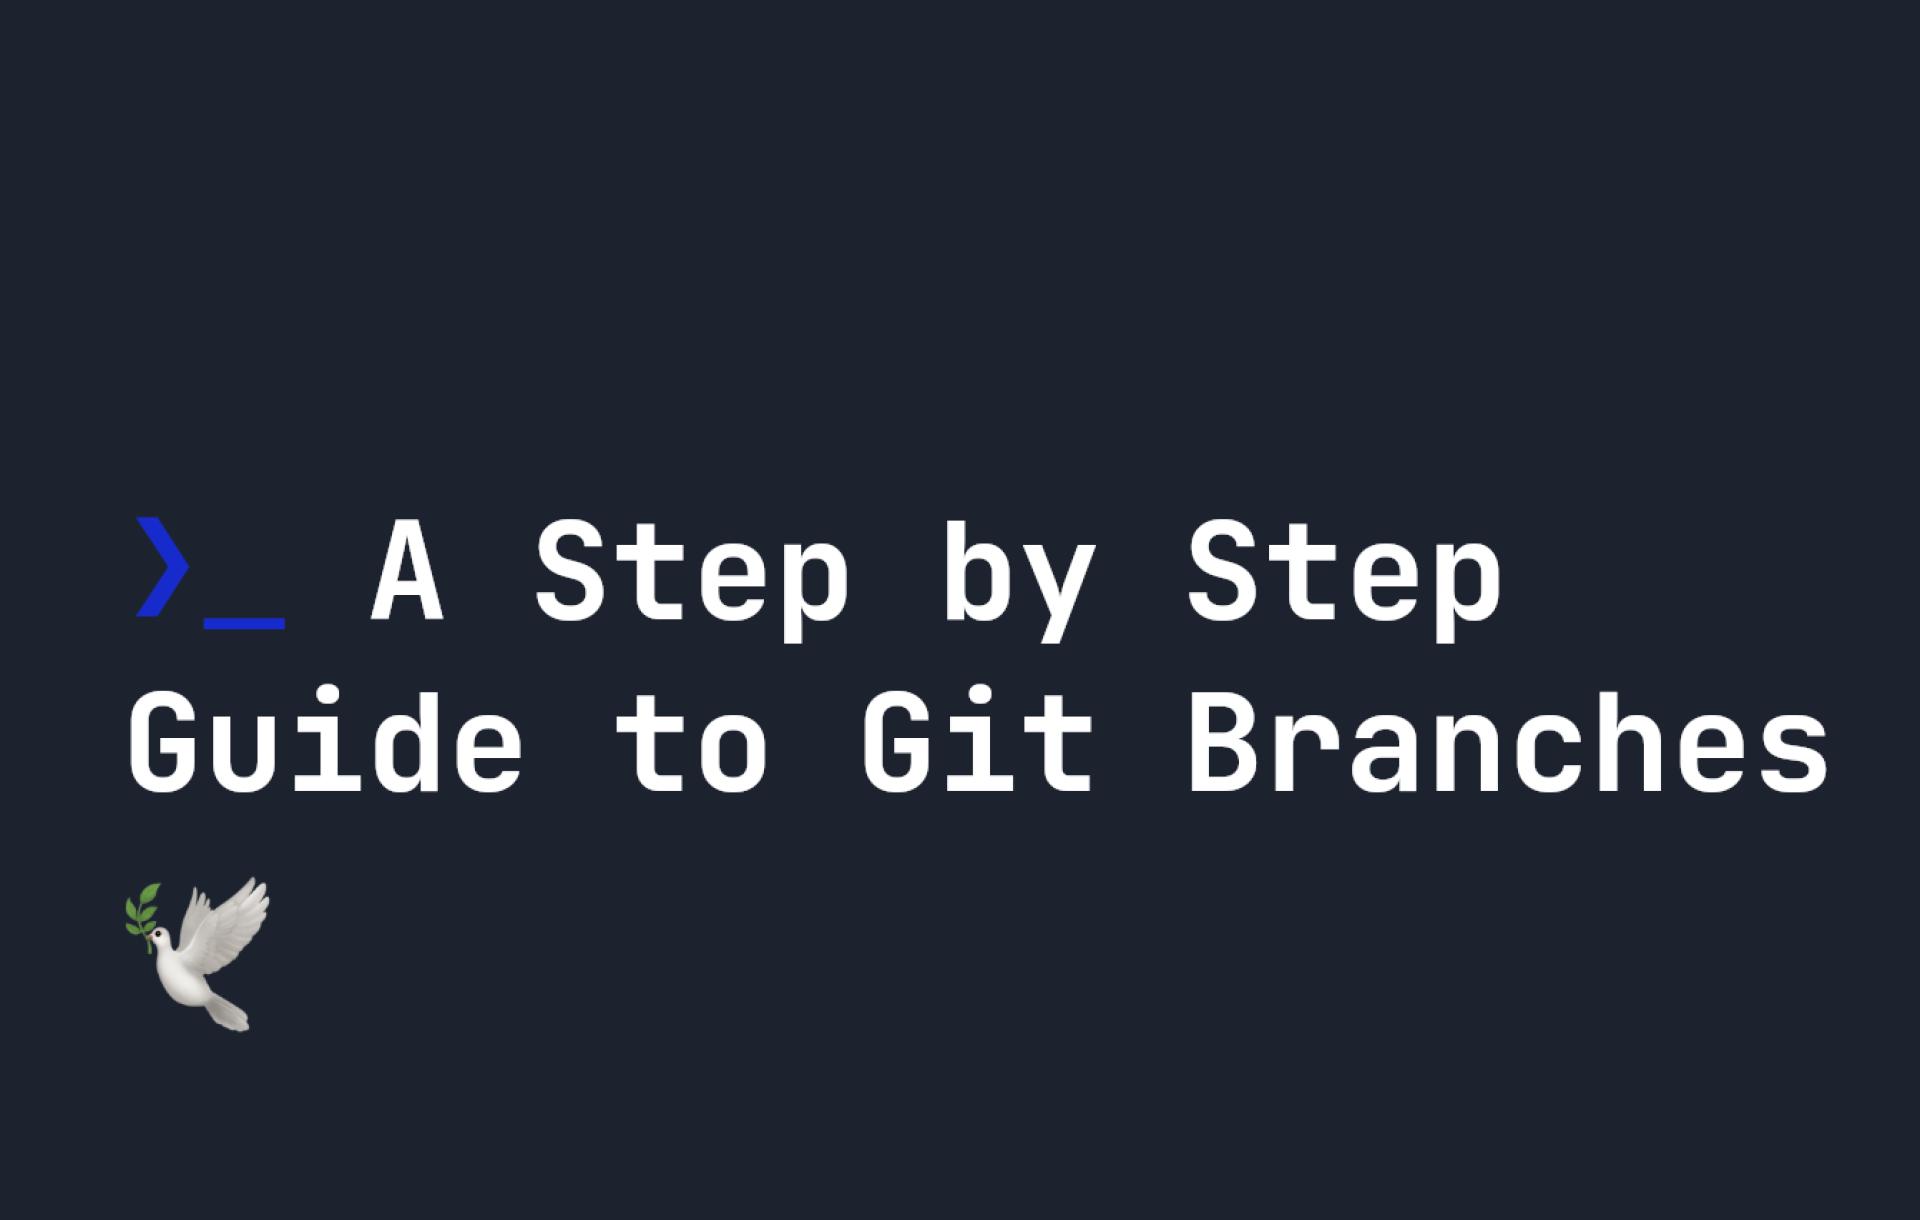 A Step by Step Guide to Git Branches